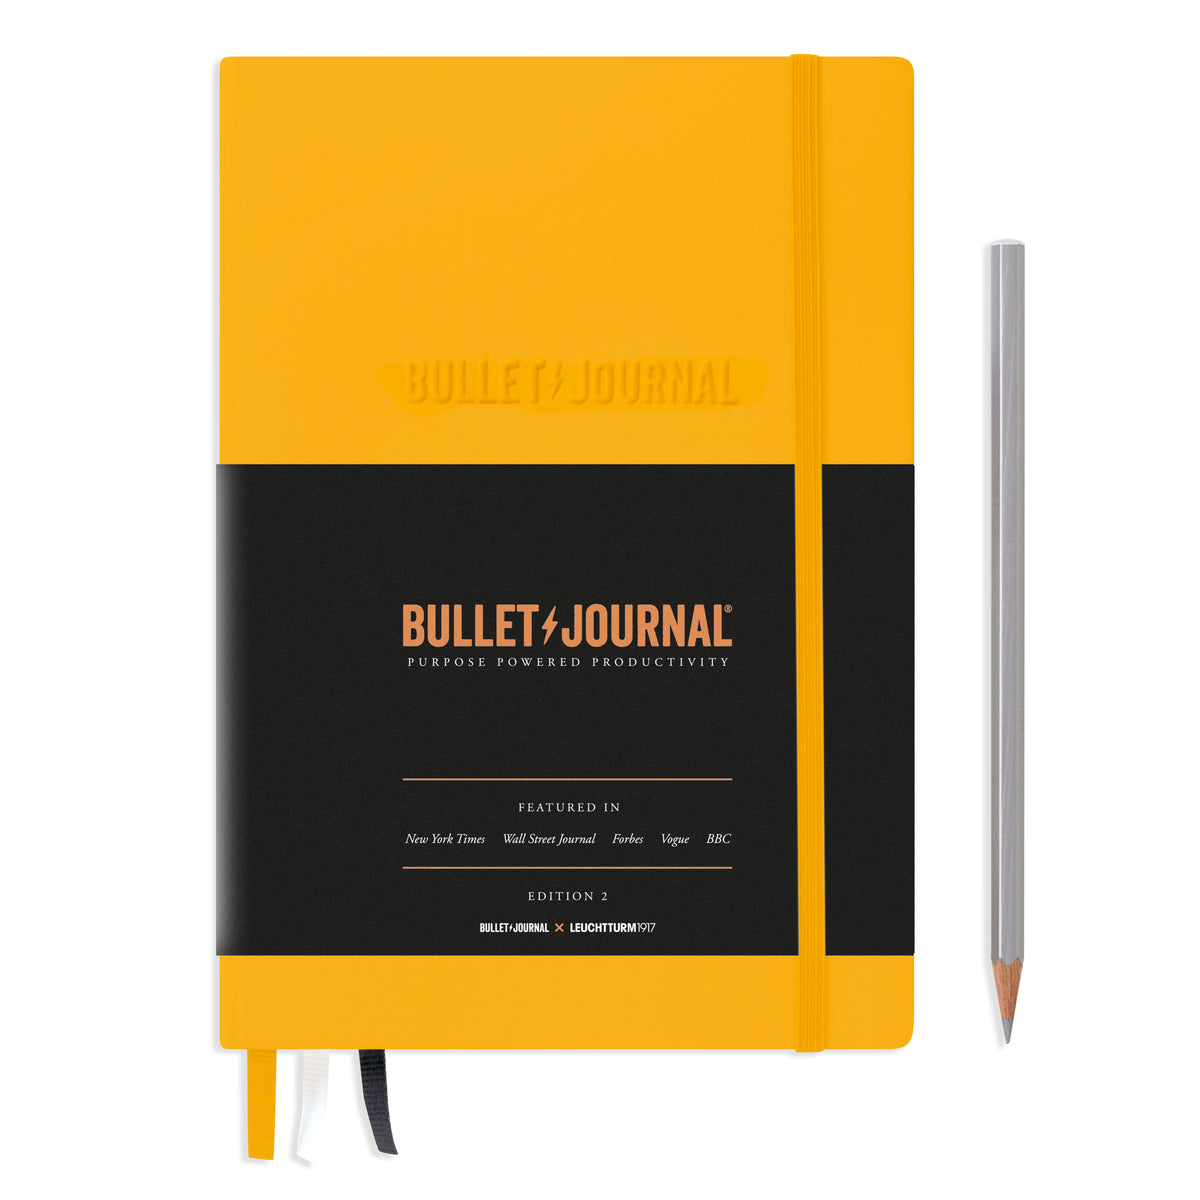 Leuchtturm1917 Bullet Journal Edition Two in yellow - Penny Black